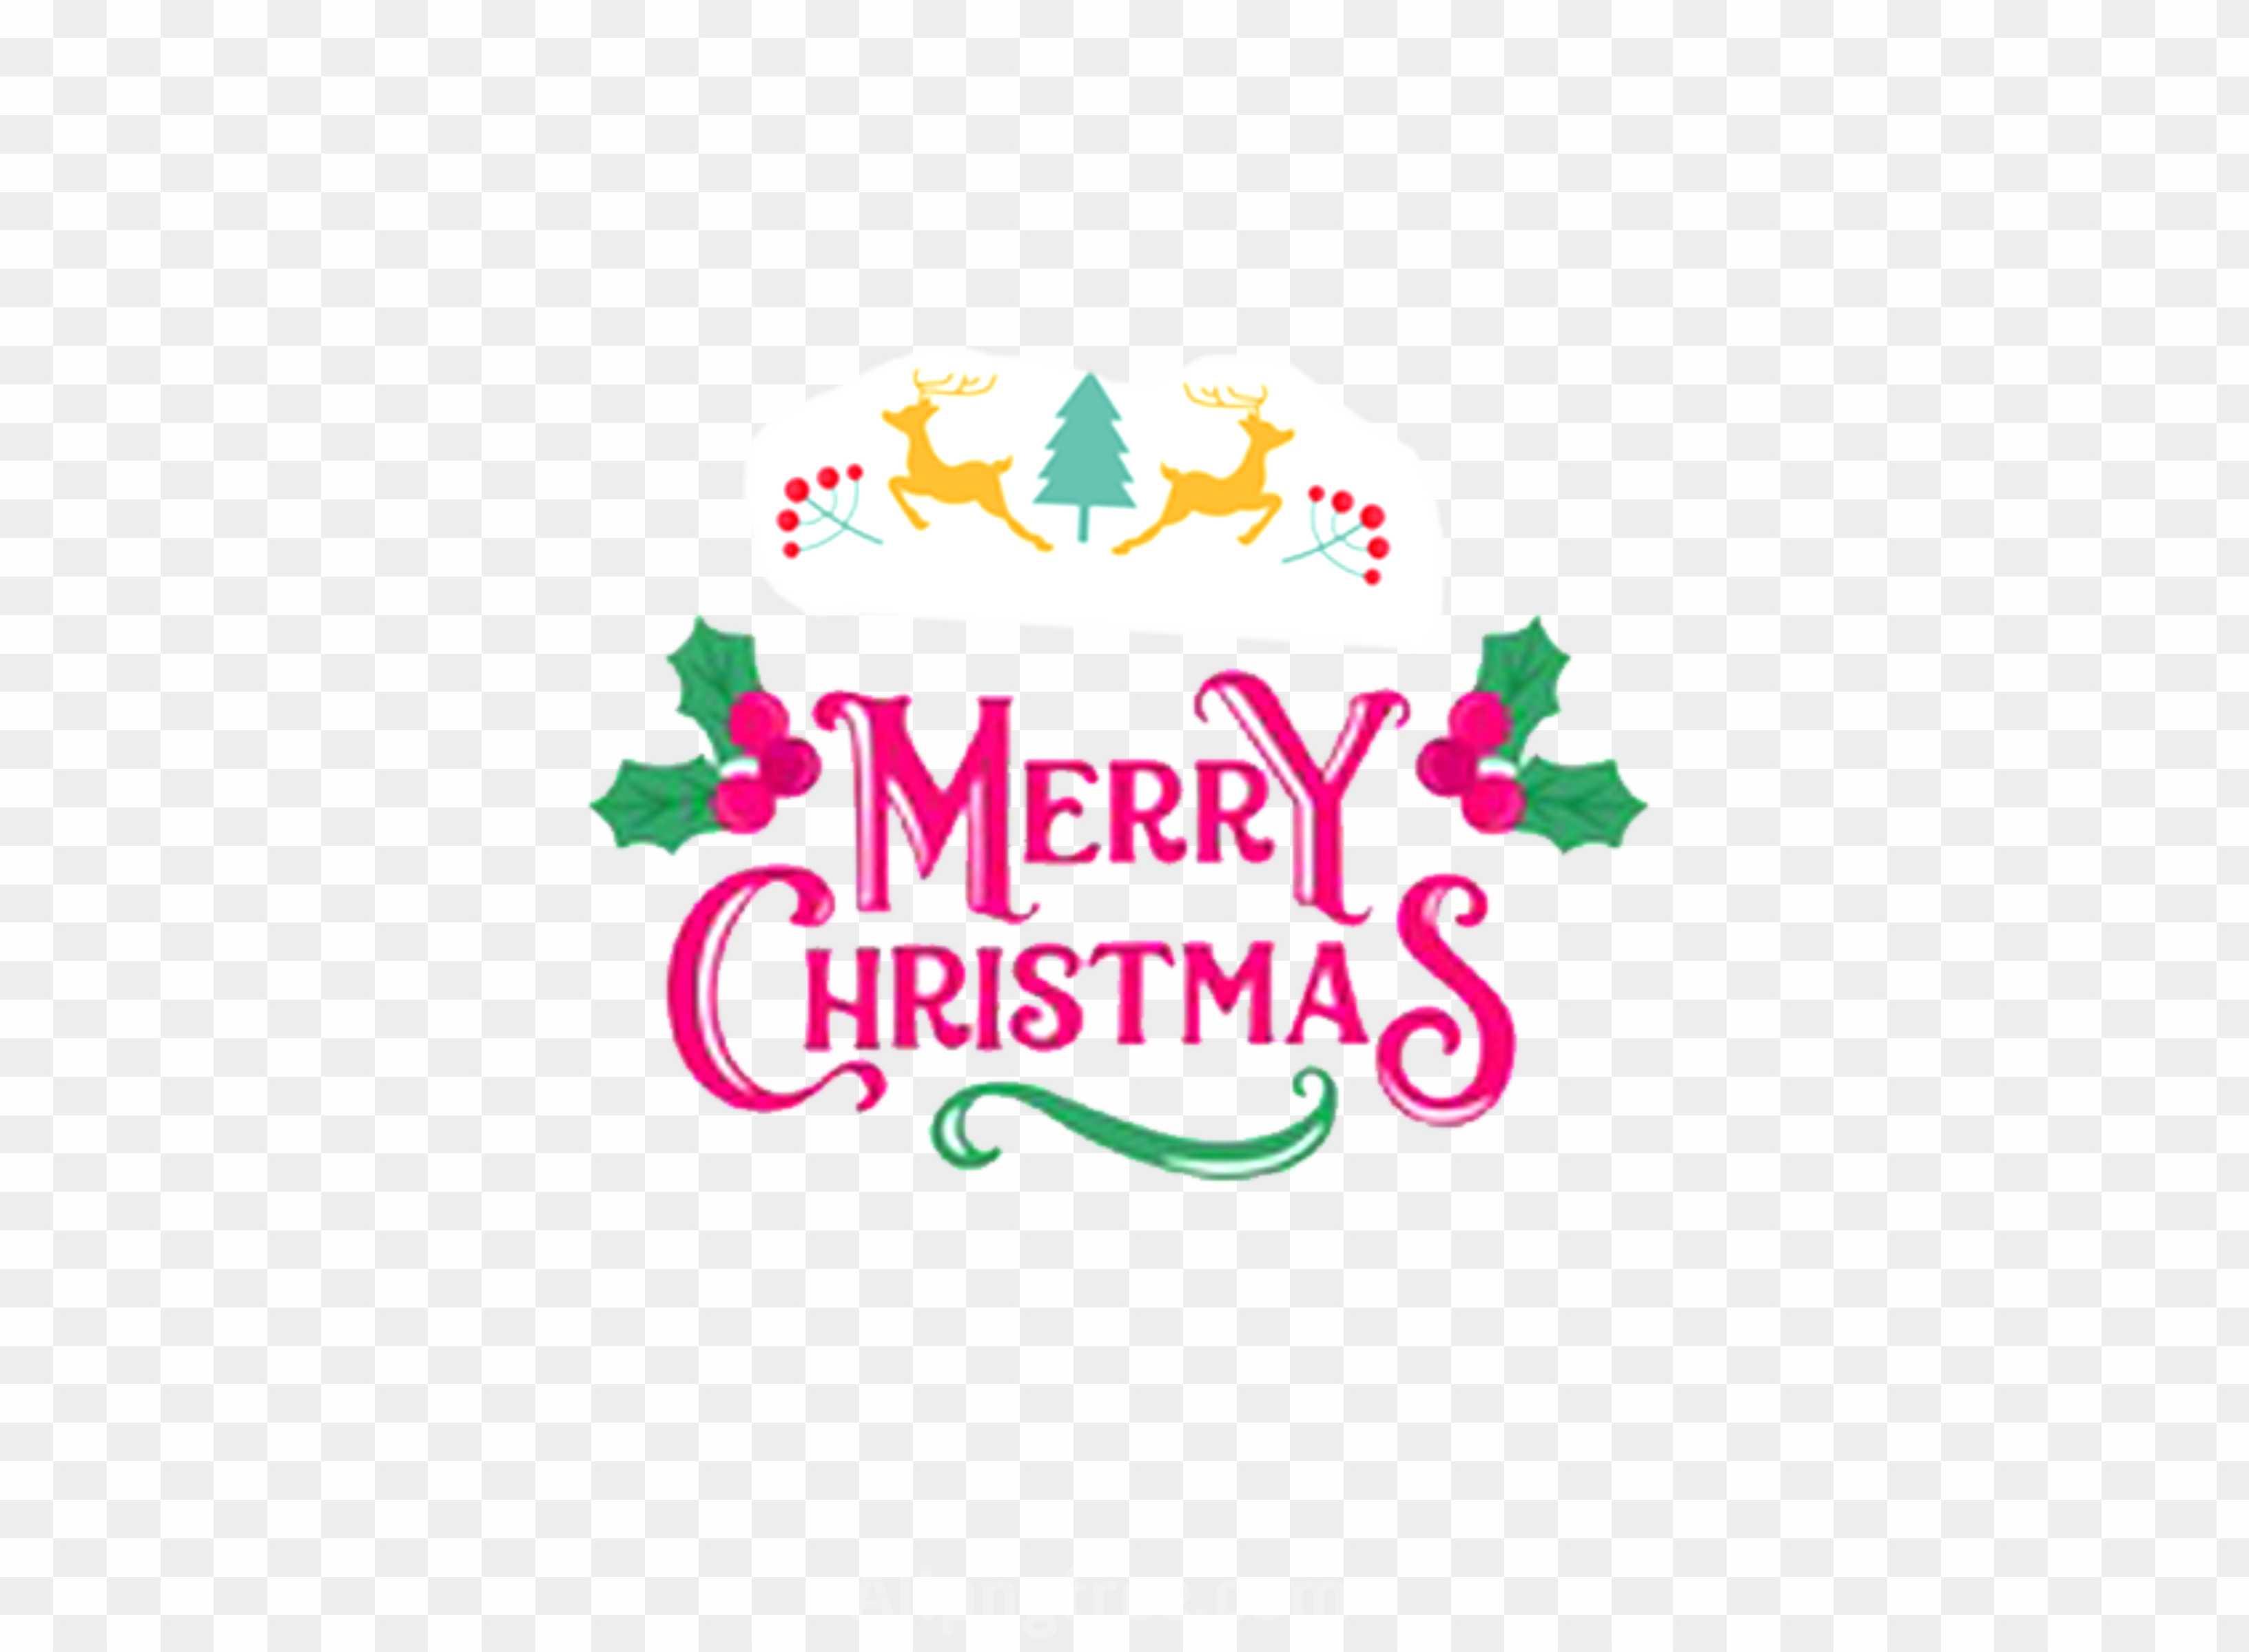 Merry Christmas font png images